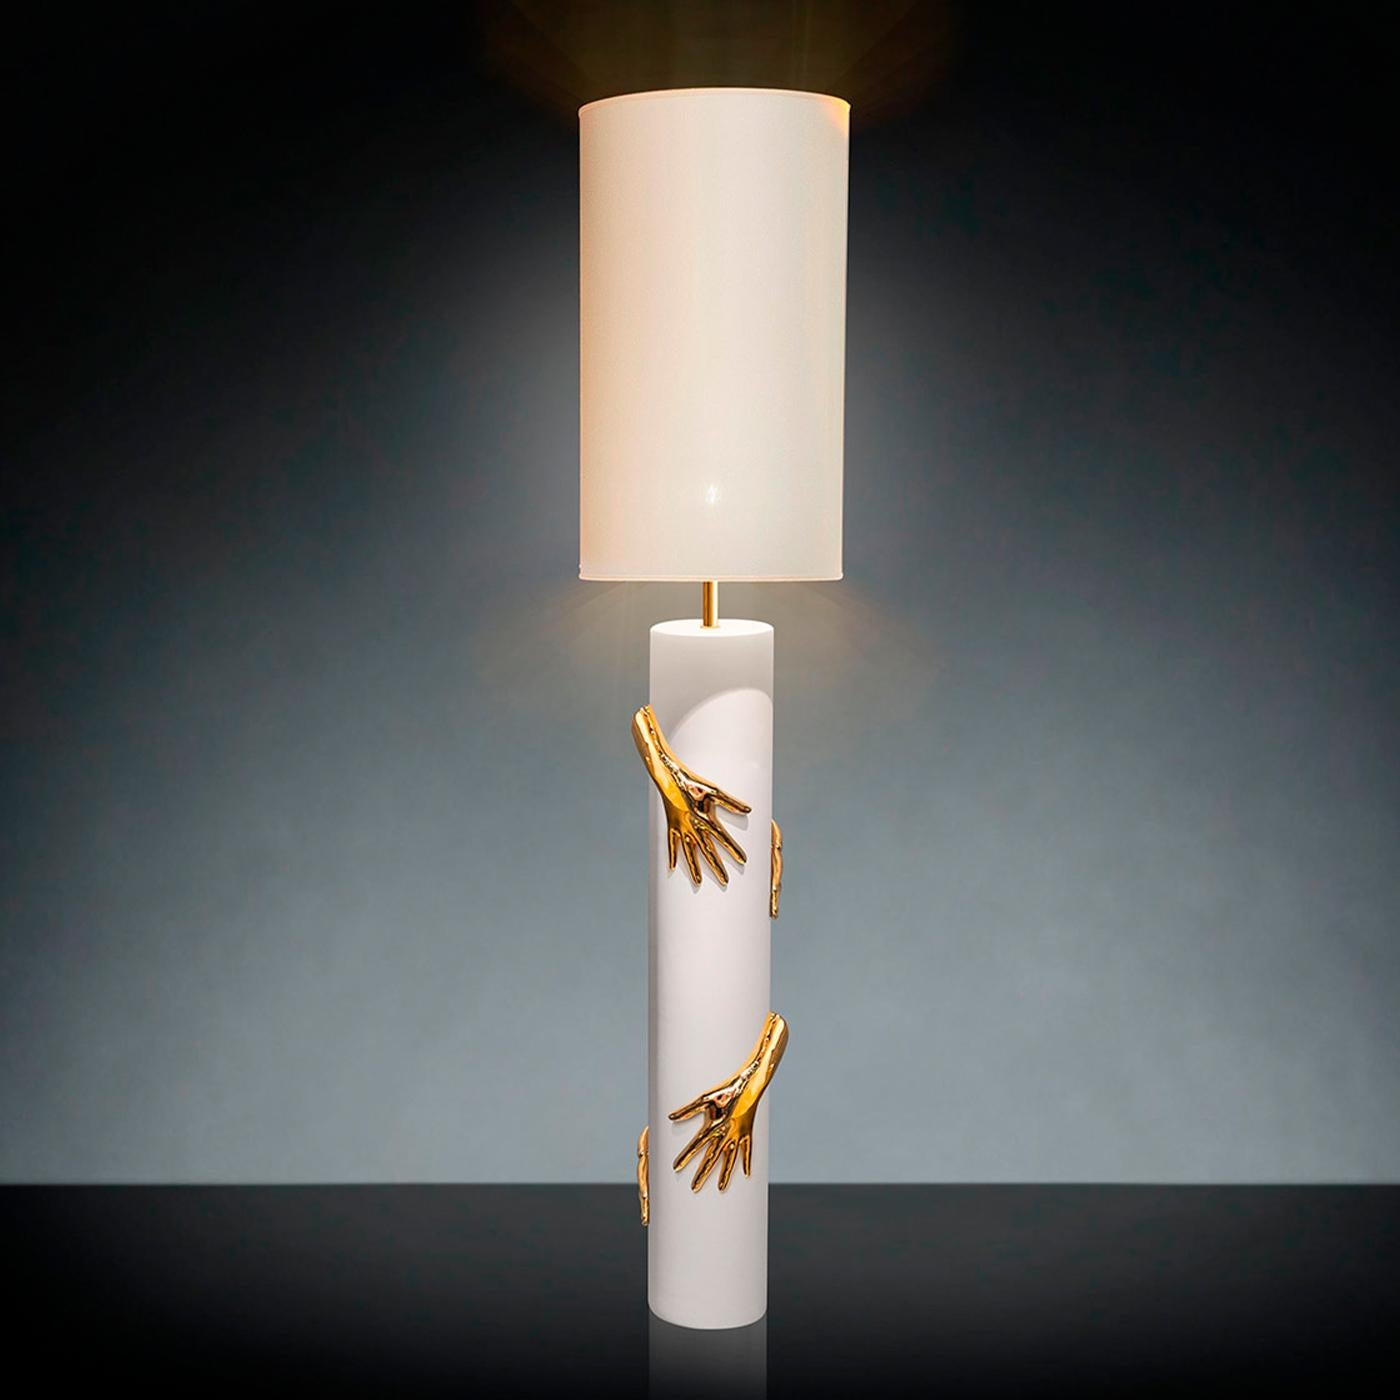 Featuring a captivating composition of polished gold and white ceramic, this superb floor/table lamp combines a minimalist silhouette with a relief insert in the shape of four hands almost looking alive as they embrace the cylindrical stand. The 24k